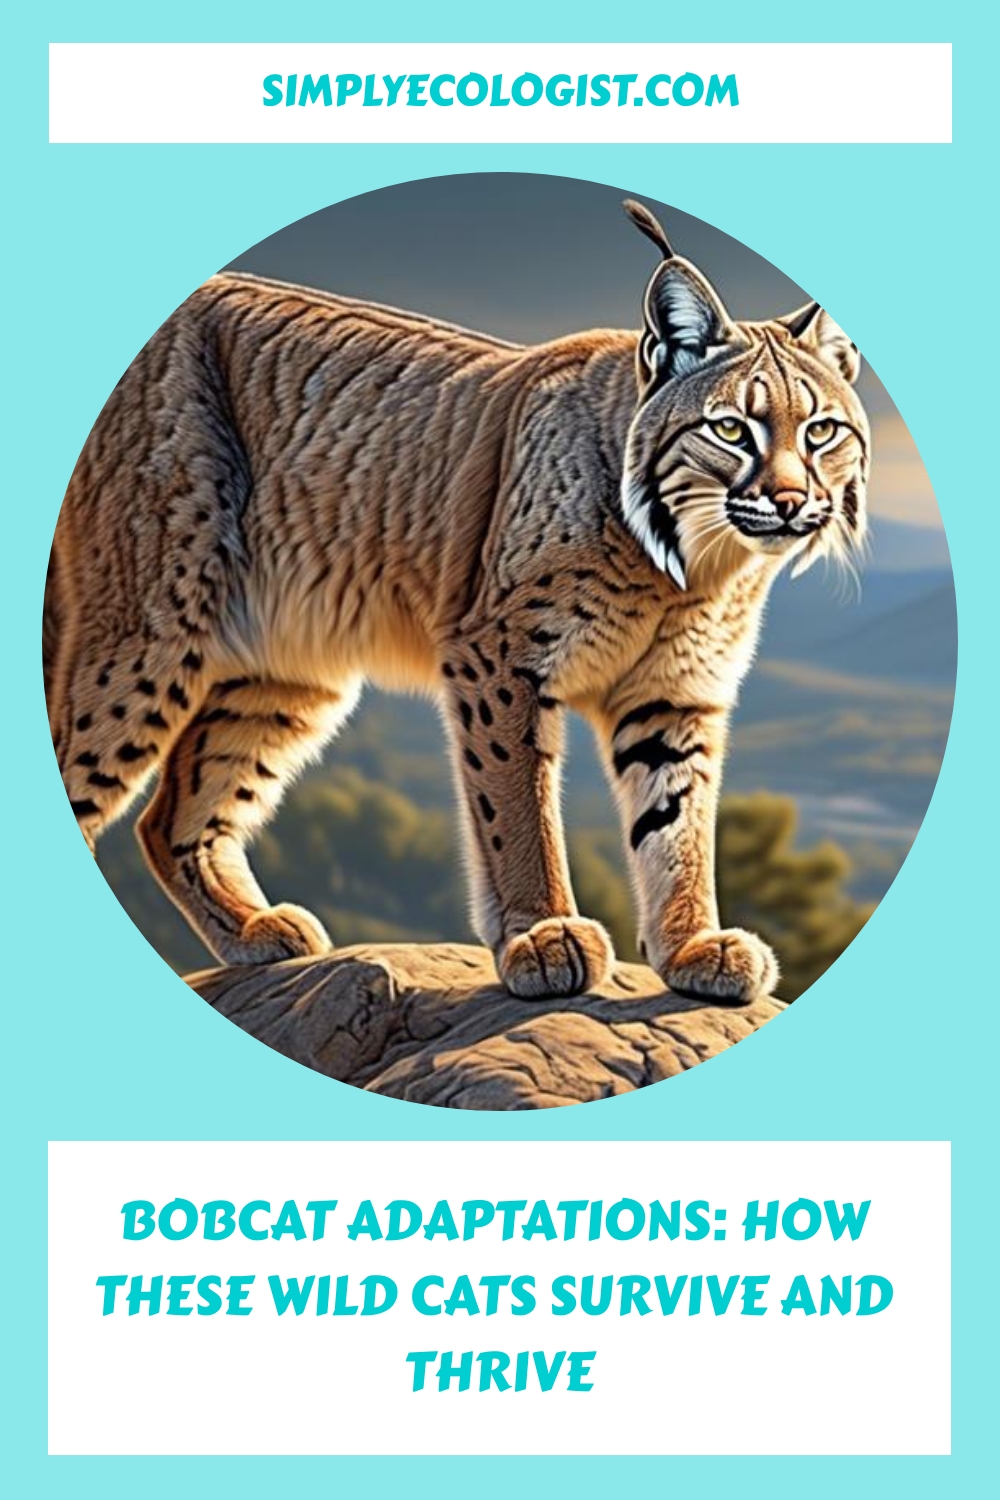 Bobcat Adaptations: How These Wild Cats Survive and Thrive